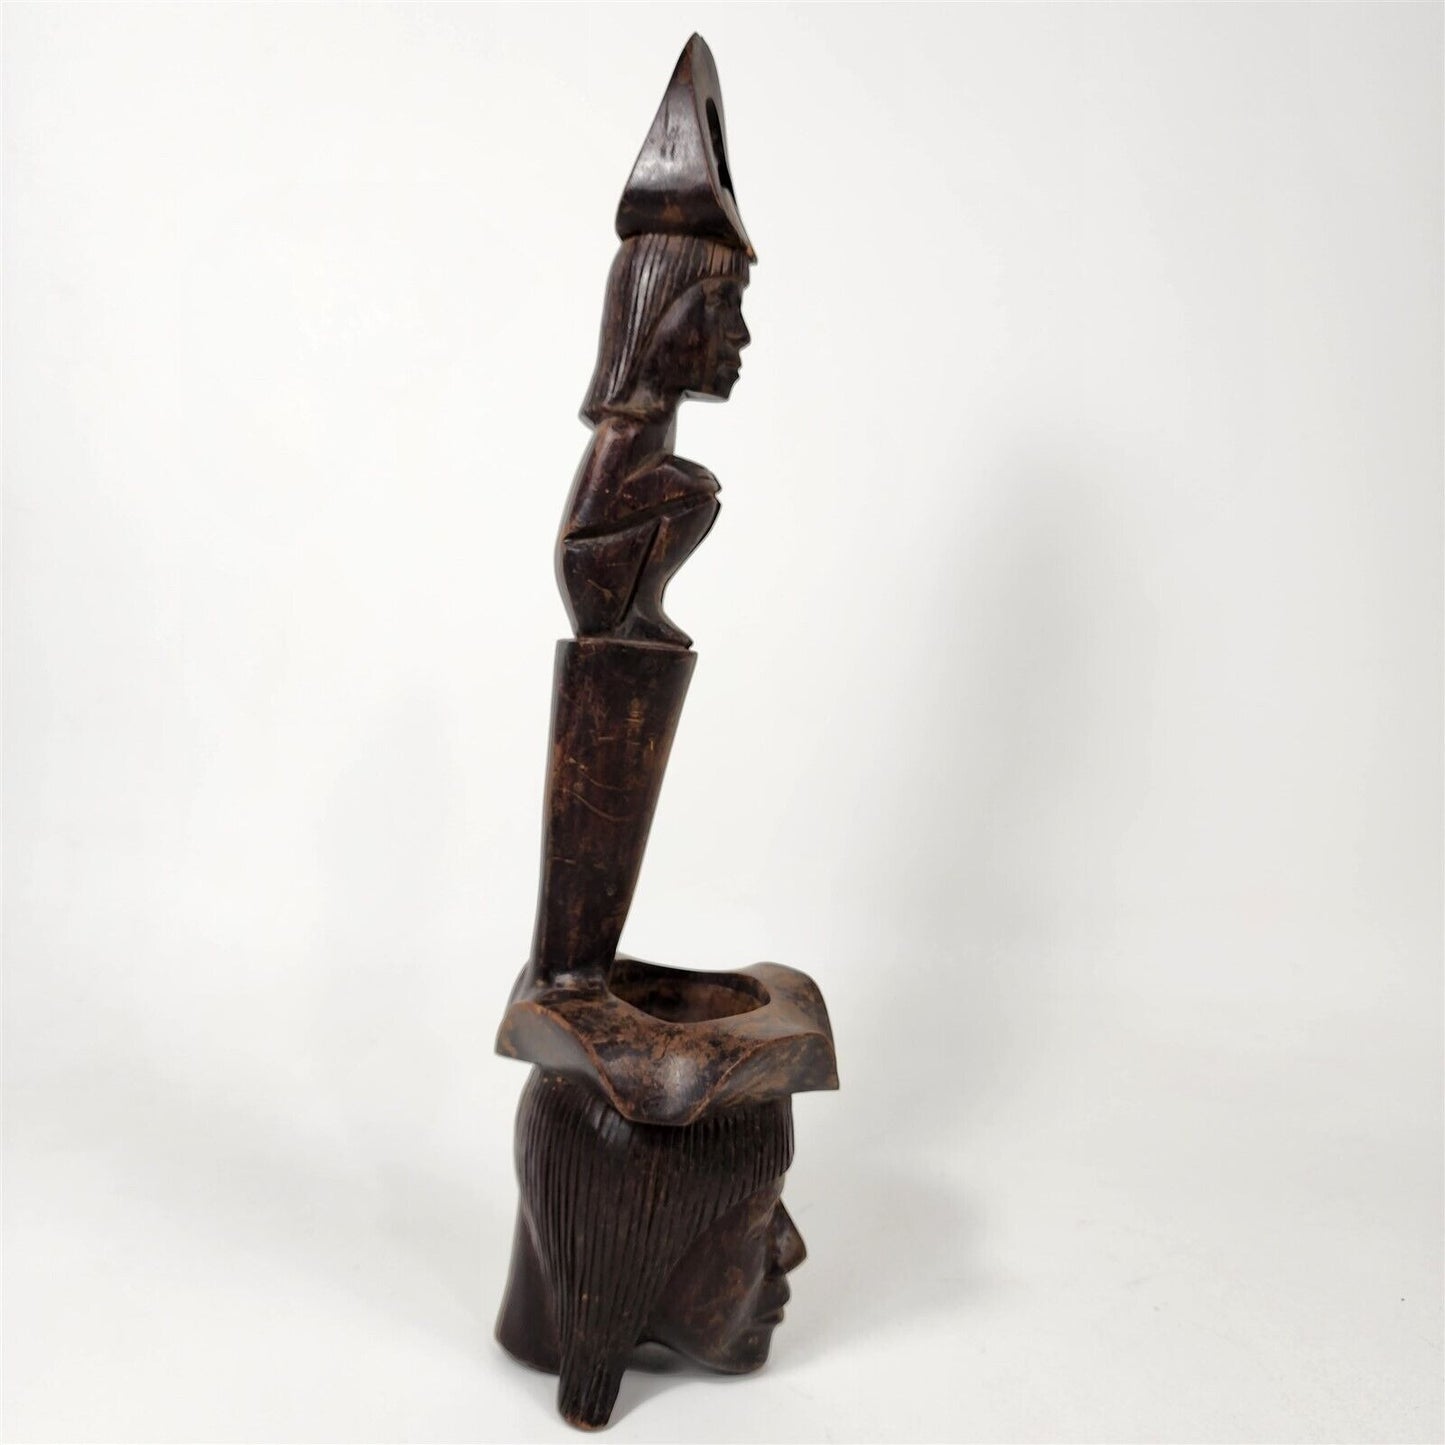 Vintage African Fertility Statue Carved Wood Tribal Art - 16" tall